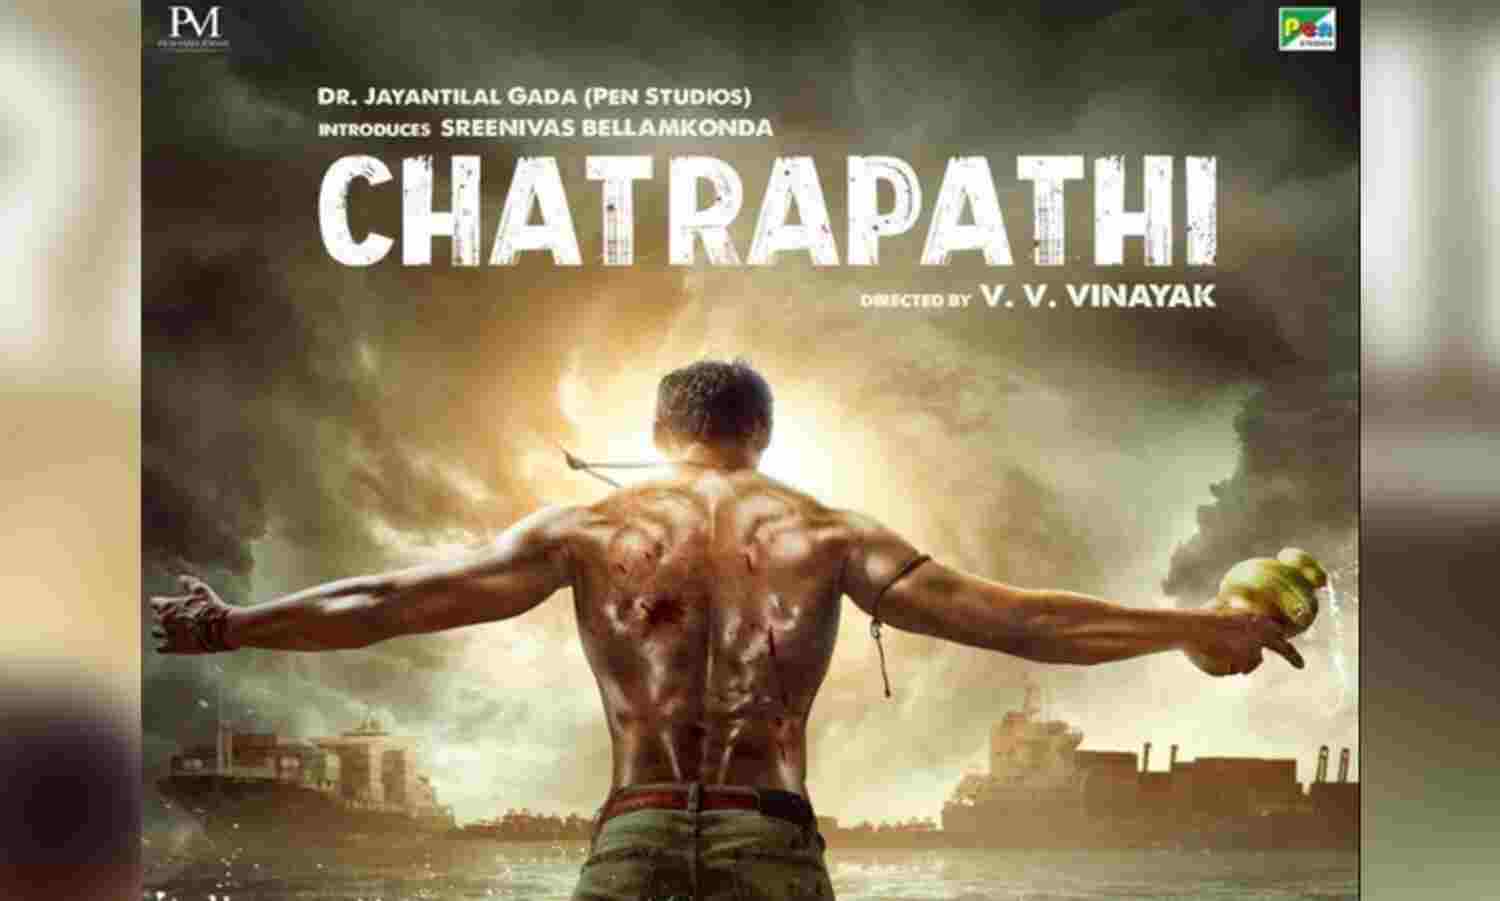 Hindi remake of Prabhass Chatrapathi gets a release date